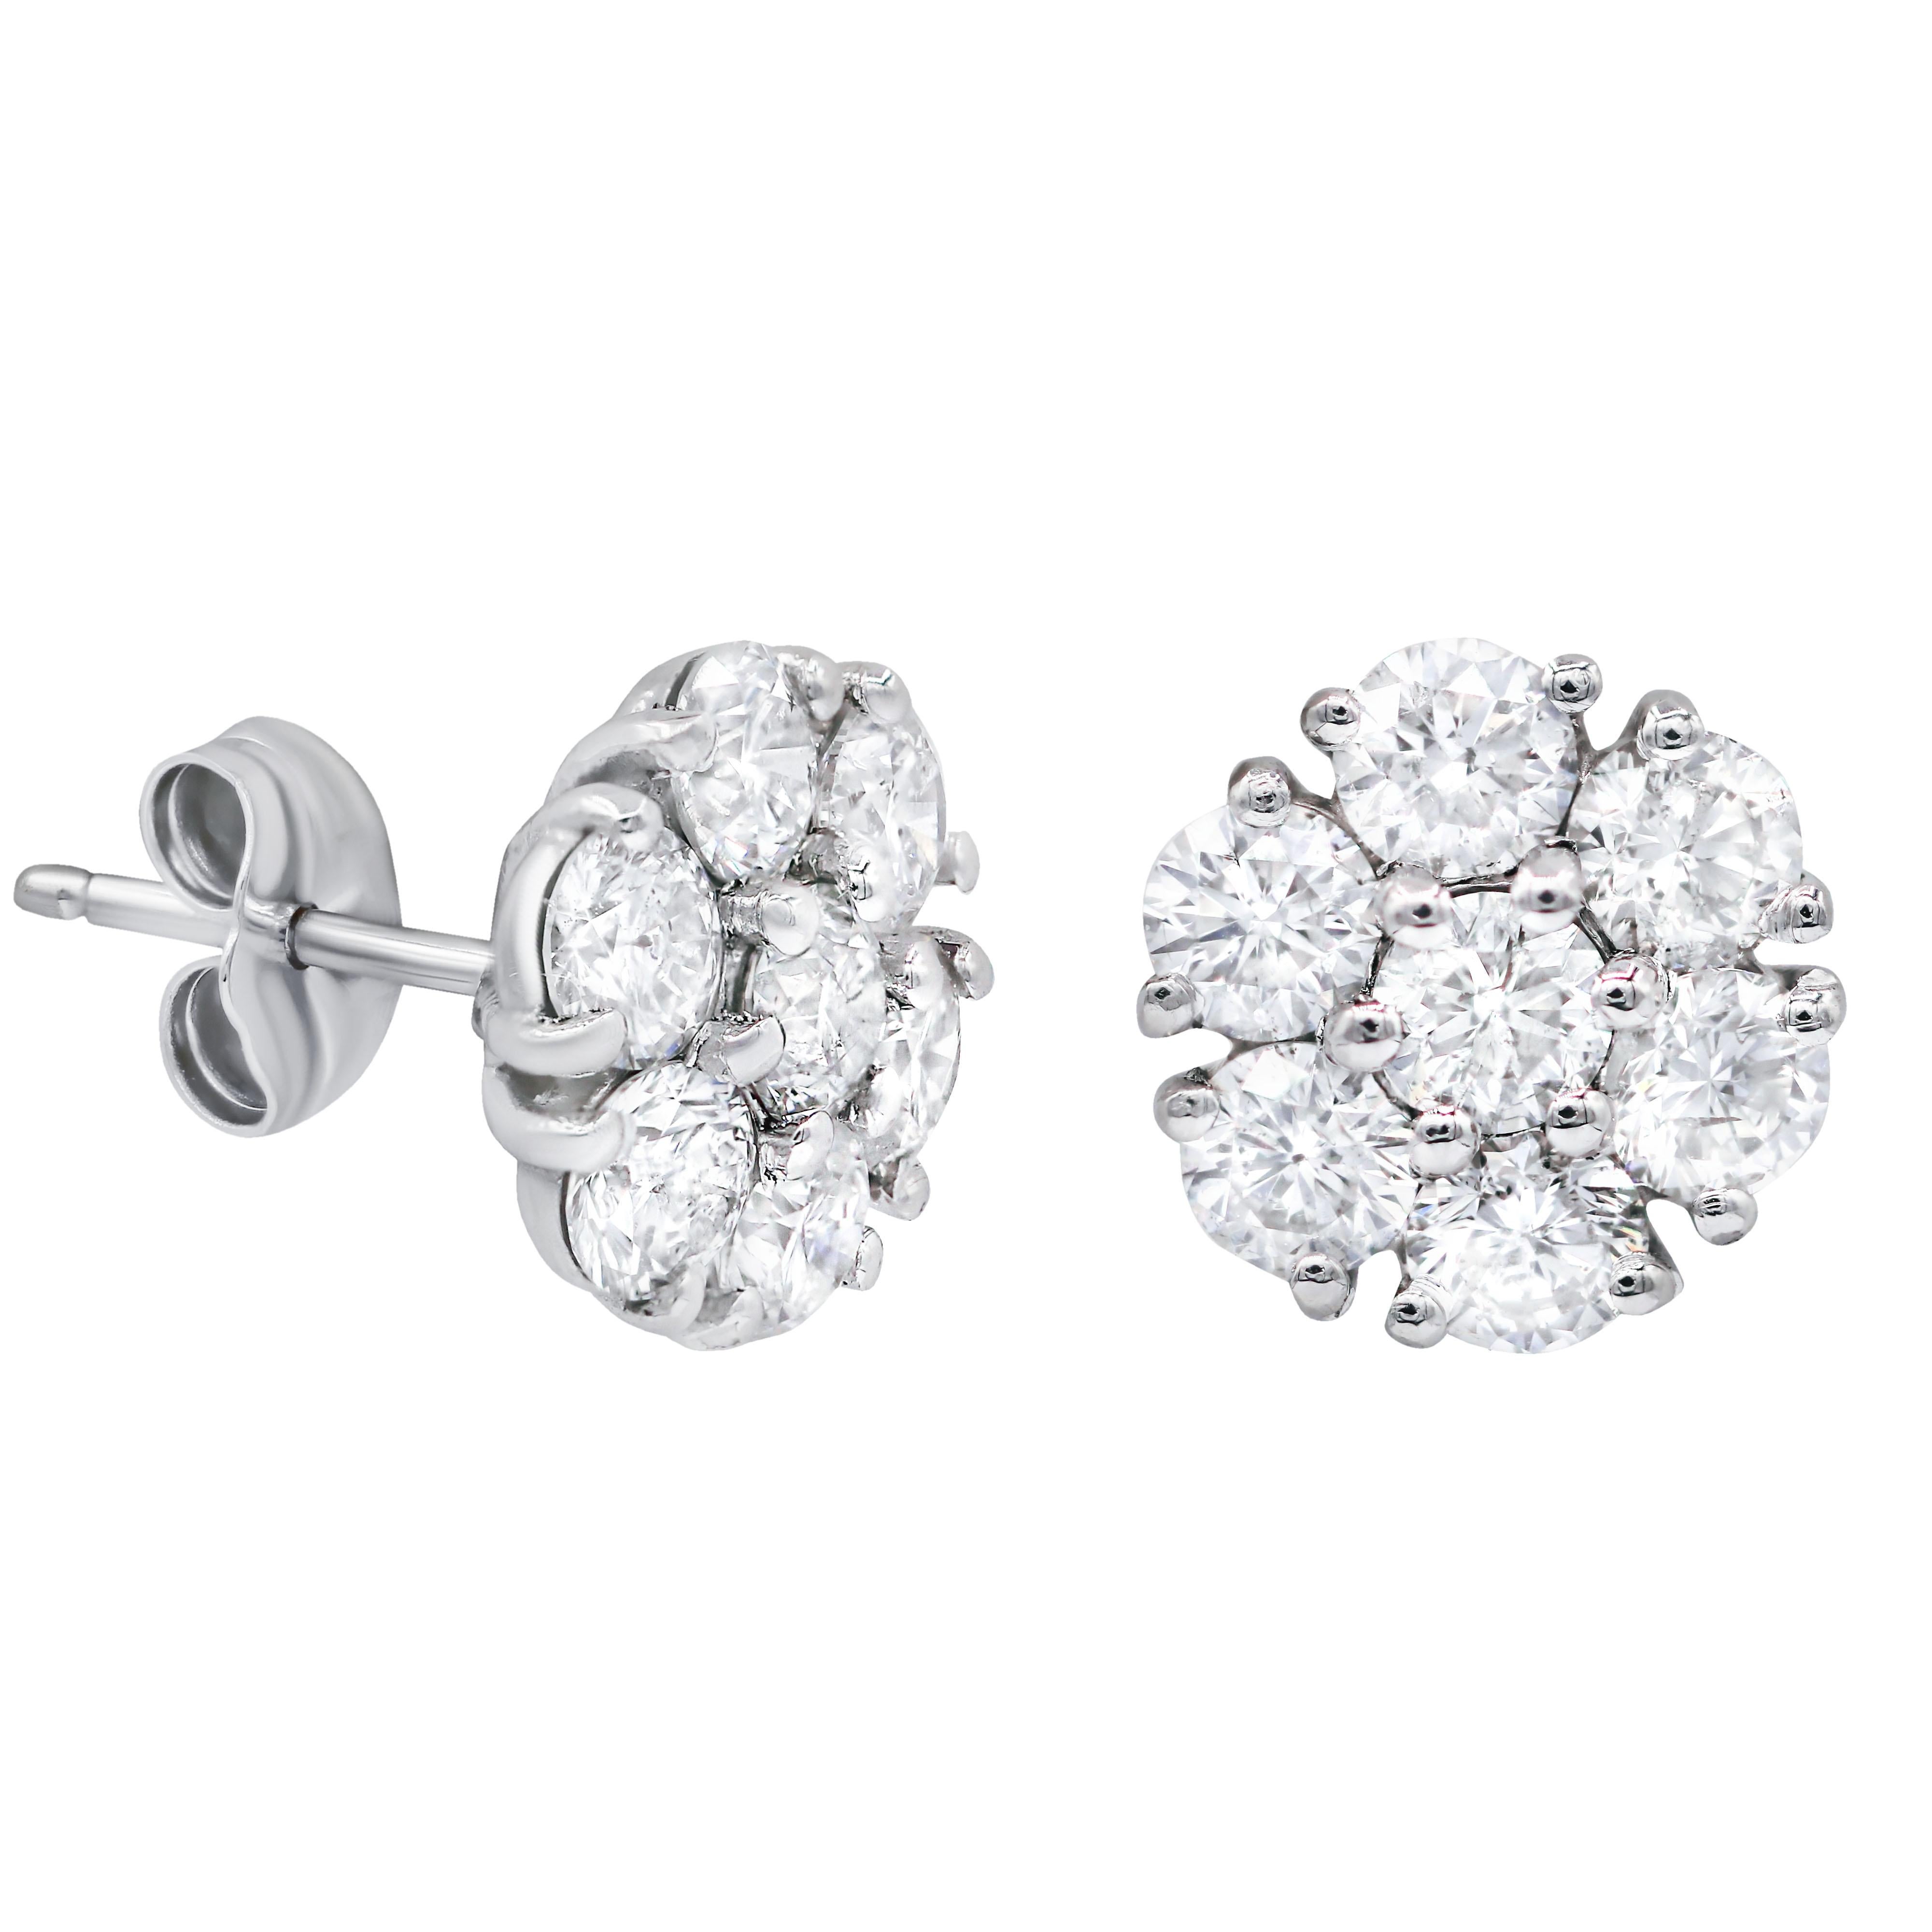 14 kt white gold diamond cluster stud earrings adorned with 2.55 cts tw of brilliant cut round diamonds.
Diana M. has been a leading supplier of top-quality fine jewelry for over 35 years.
Diana M is a one-stop shop for all your jewelry shopping,